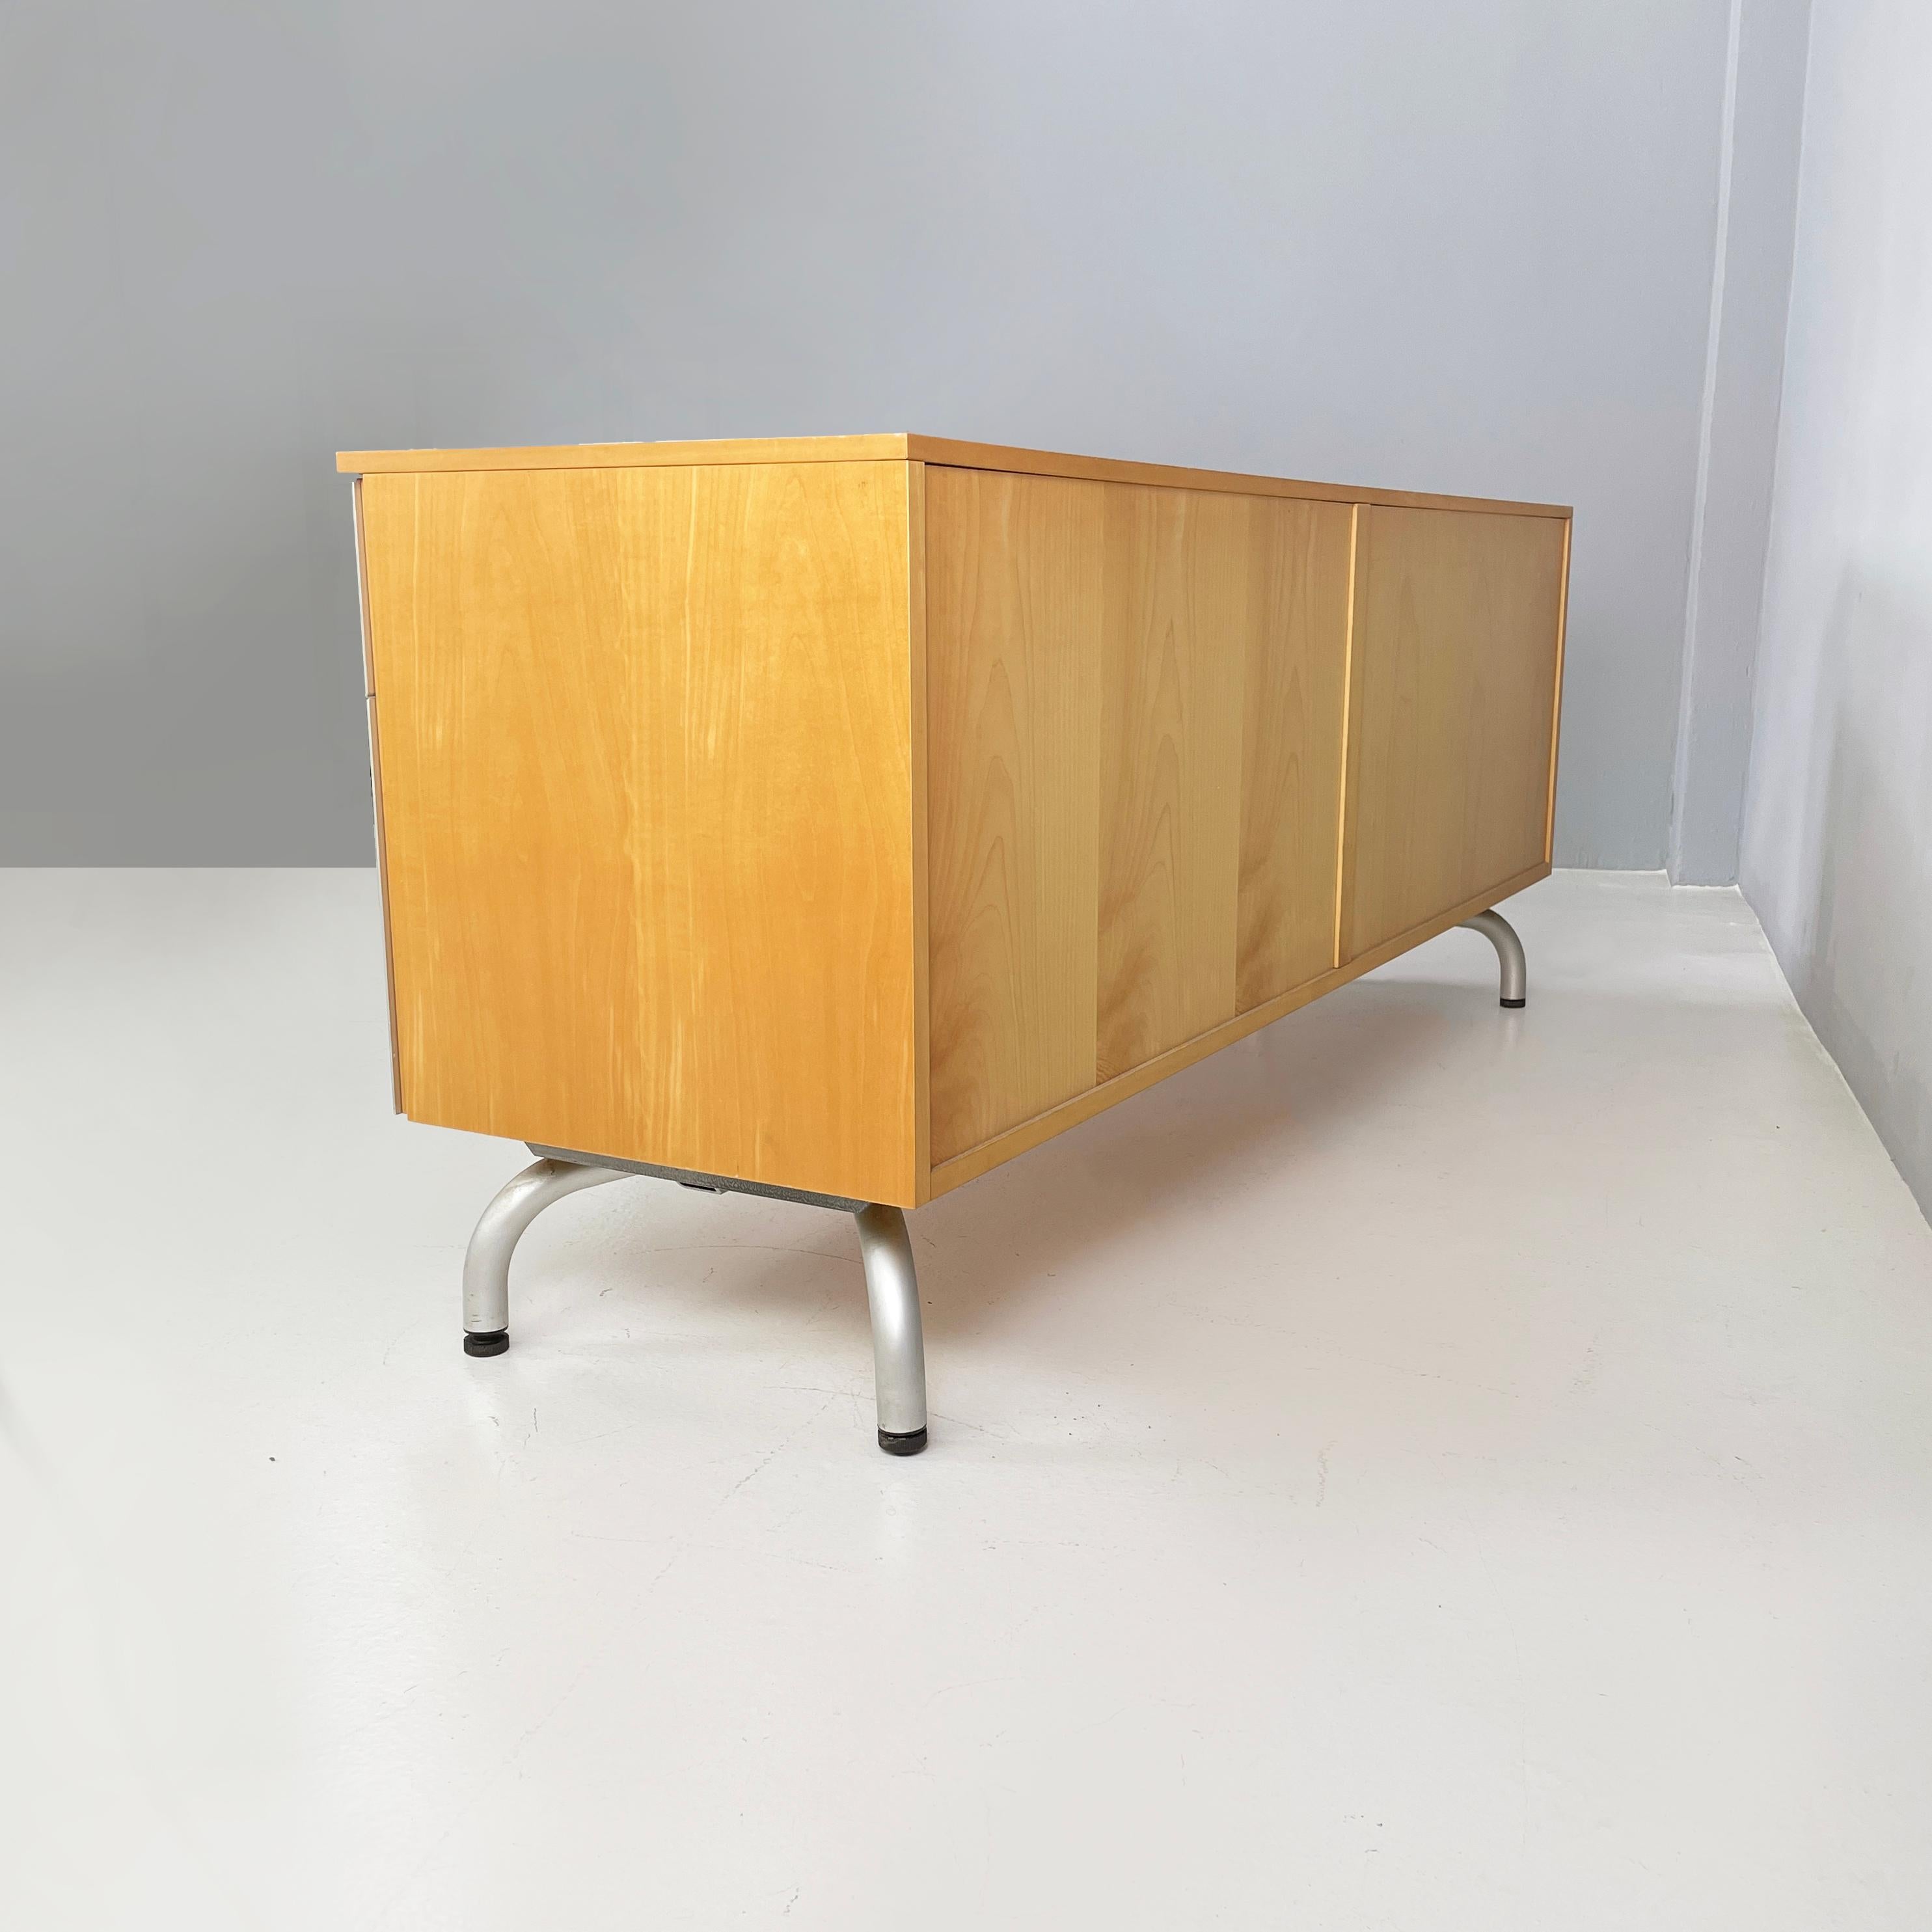 Late 20th Century Italian modern wood and metal sideboard by Vico Magistretti for De Padova, 1980s For Sale